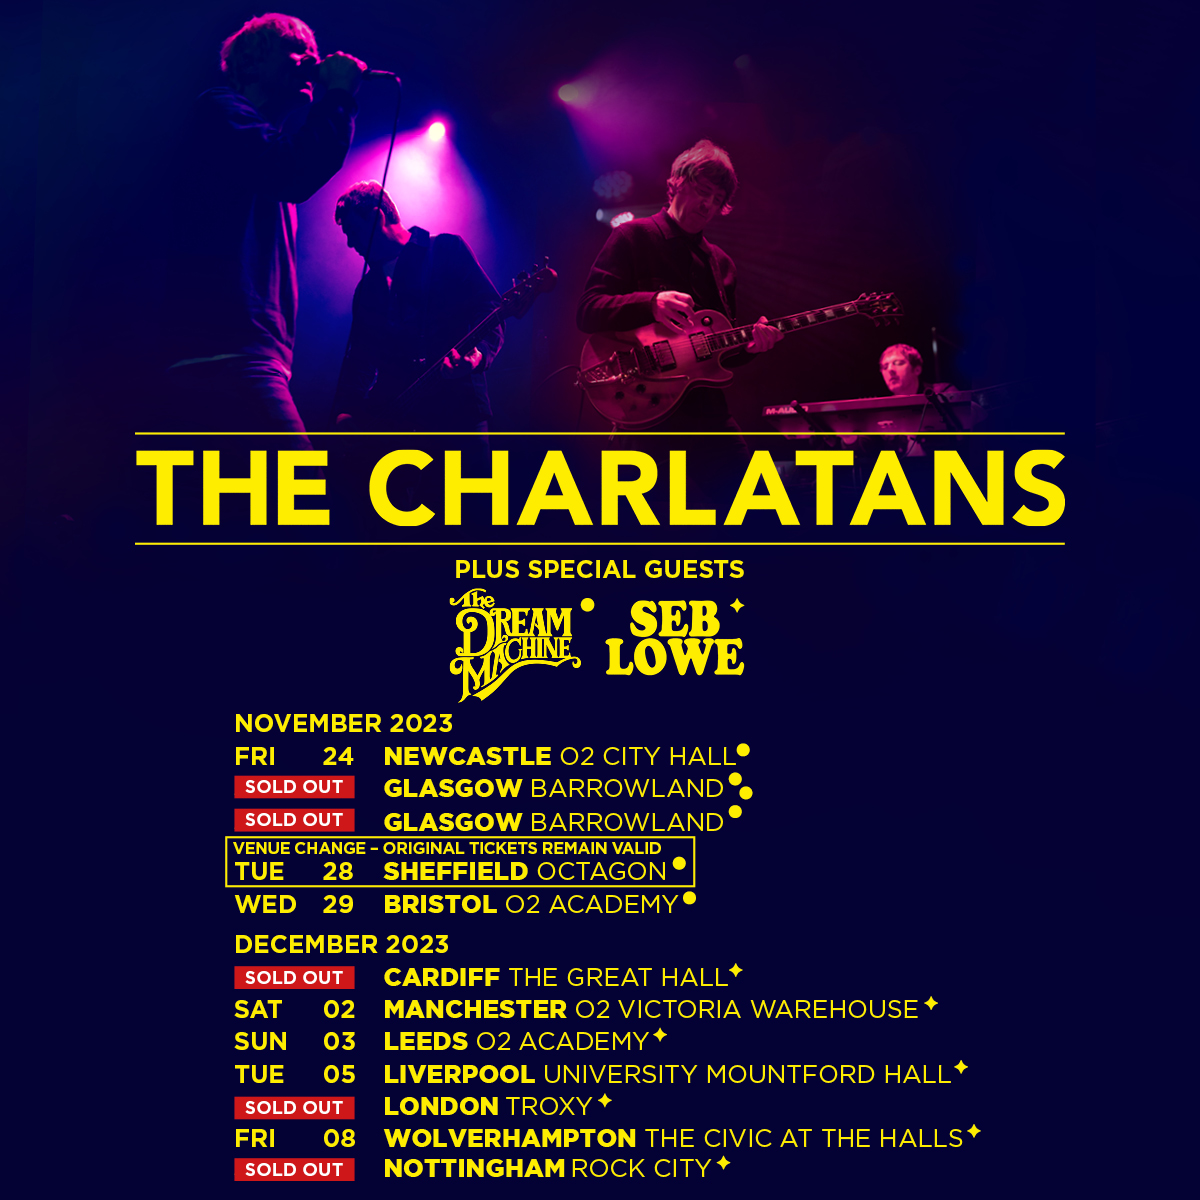 The venue for @thecharlatans Sheffield show next month has moved to Sheffield Octagon (all tickets remain valid) 👇 Tickets over here tix.to/Charlatans